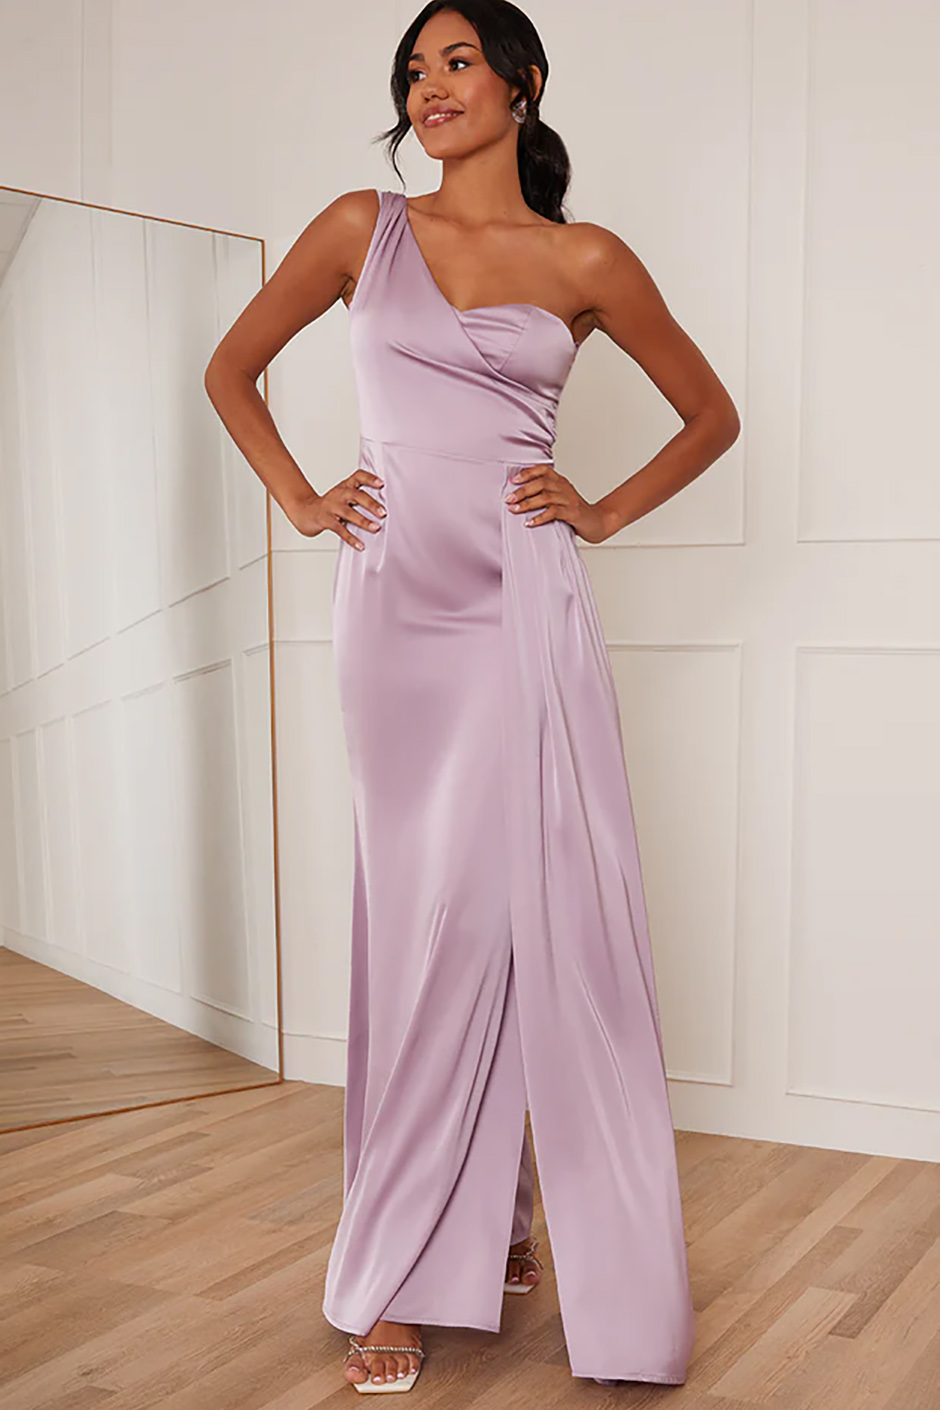 Spring bridesmaid dress from Chi Chi - lilac satin one shoulder maxi gown from Chi Chi London